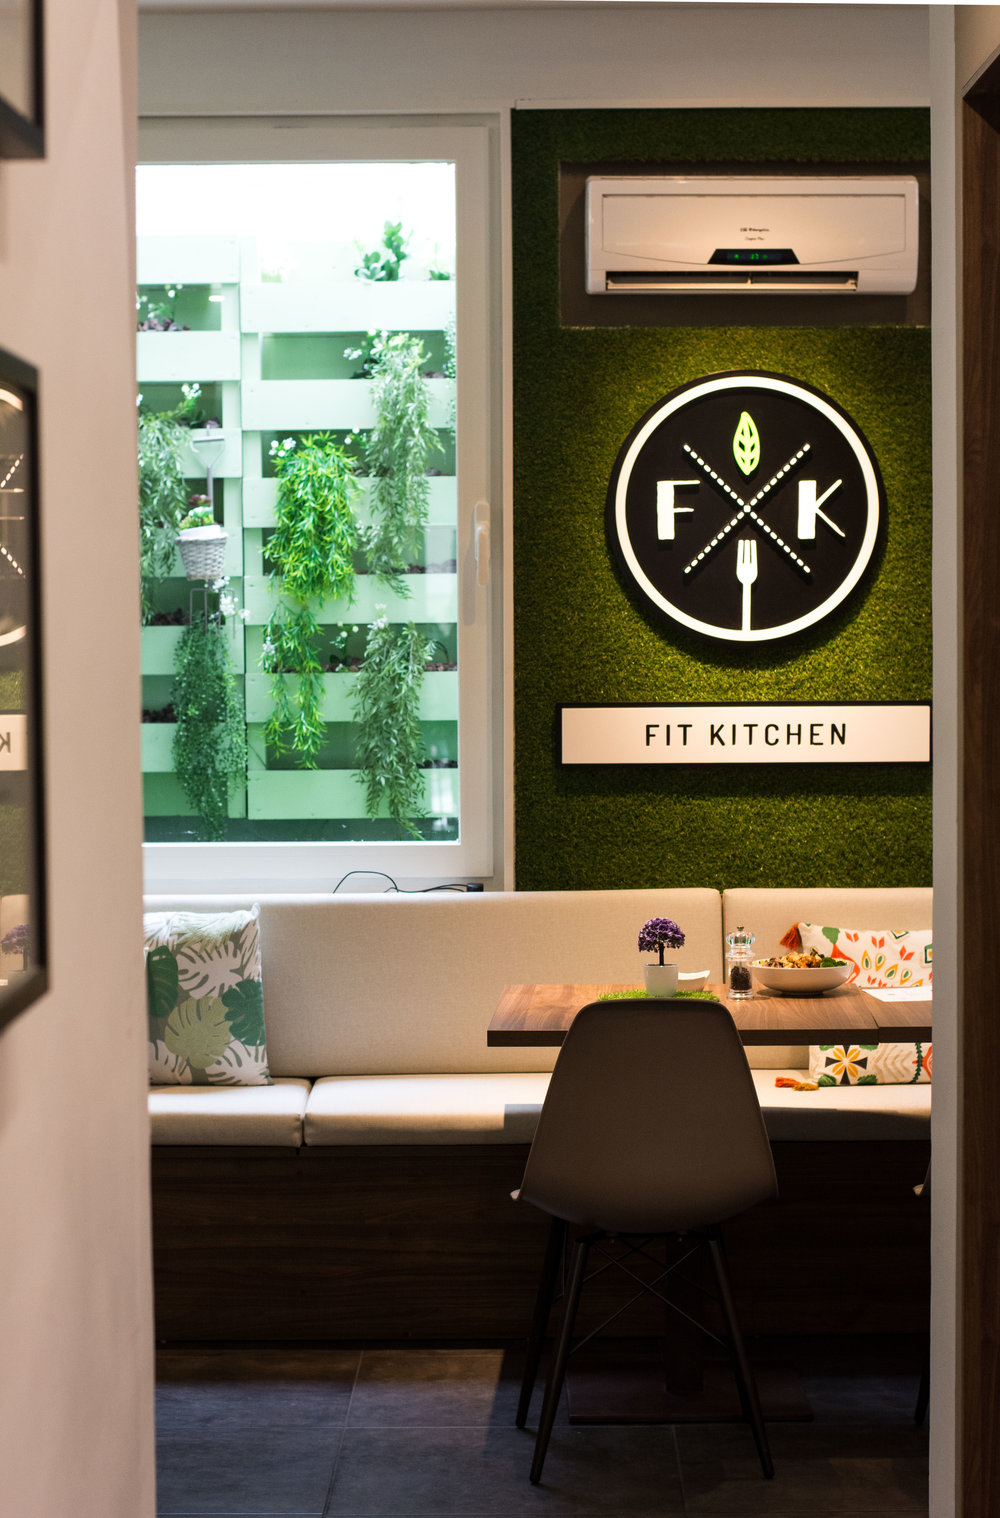 Fit Kitchen Nutritional Healthy Food For Everyone BARCELONA